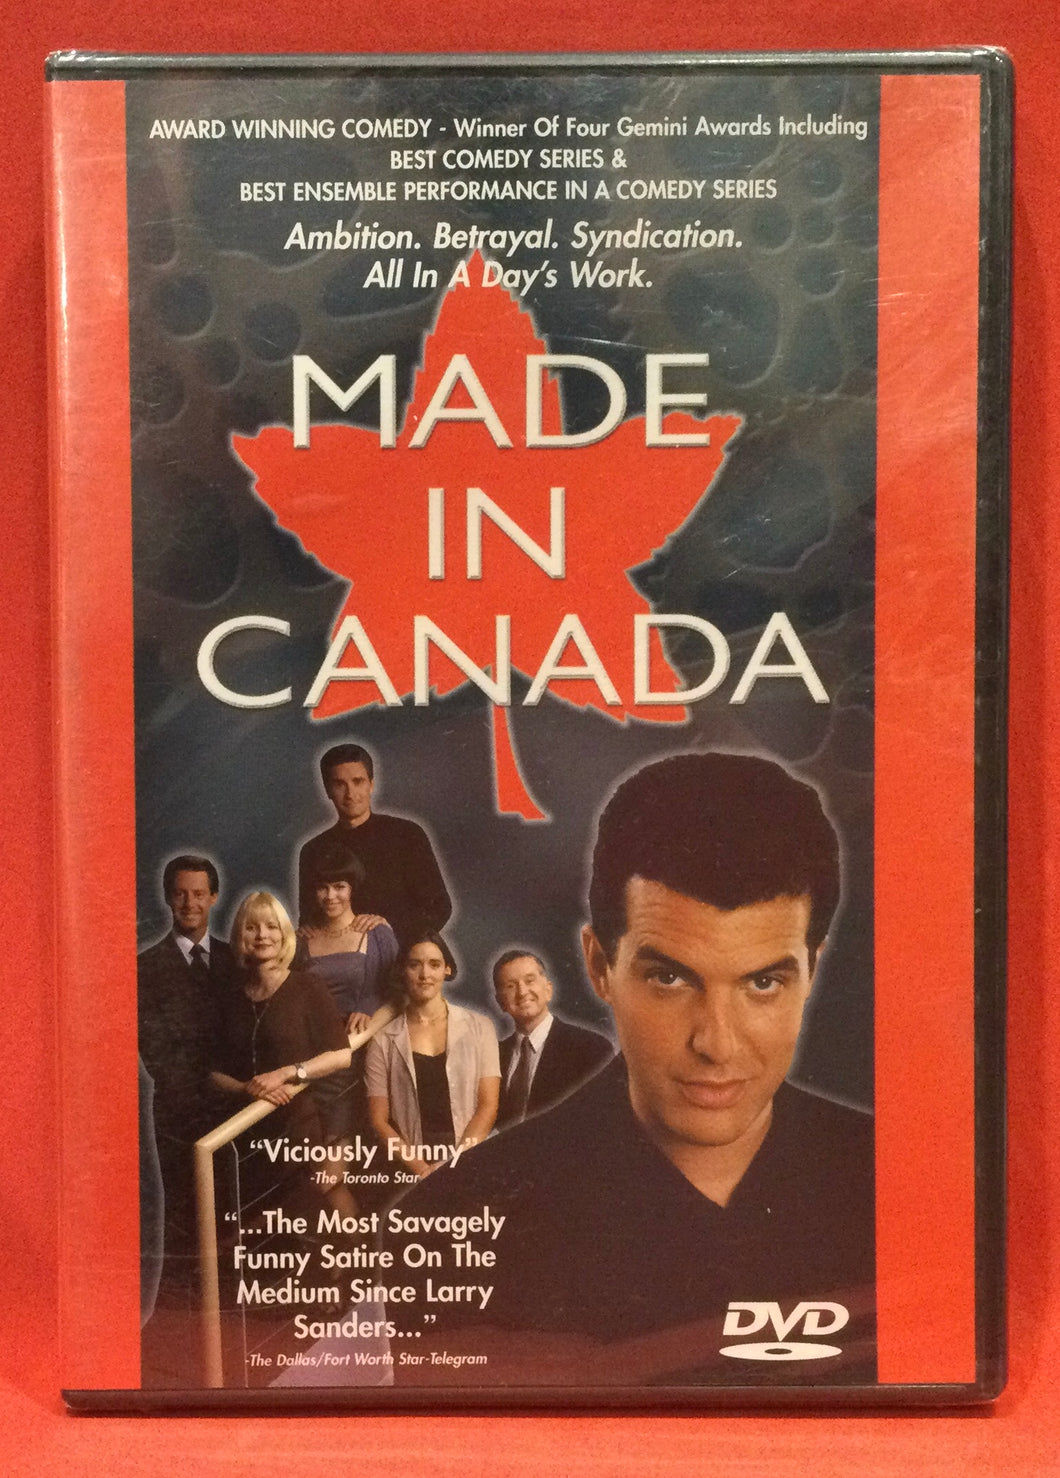 MADE IN CANADA - COMEDY SERIES DVD (SEALED)